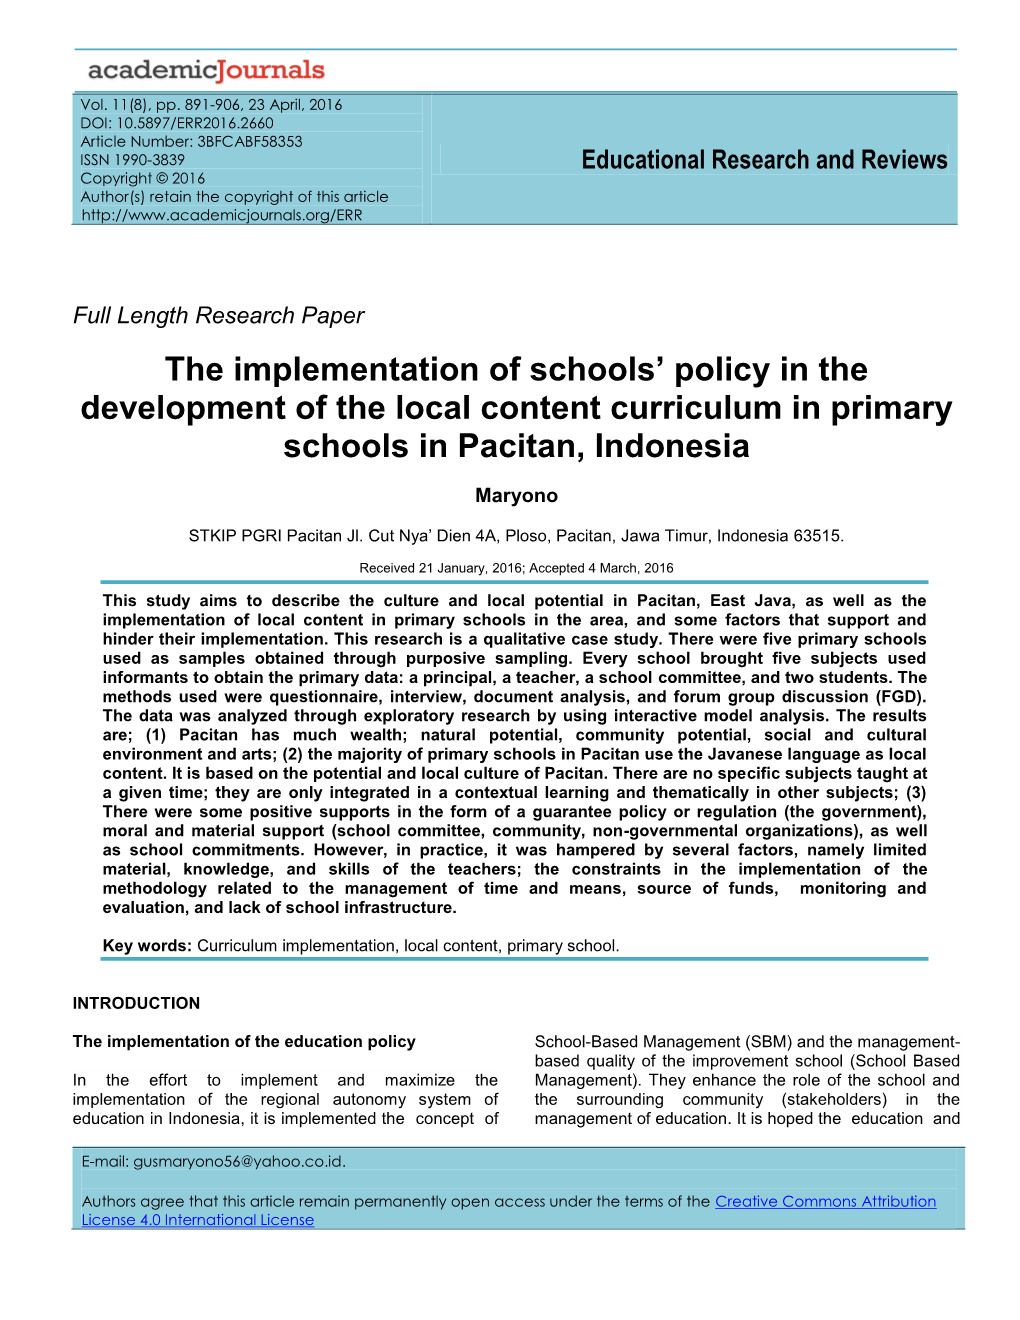 The Implementation of Schools' Policy in the Development of the Local